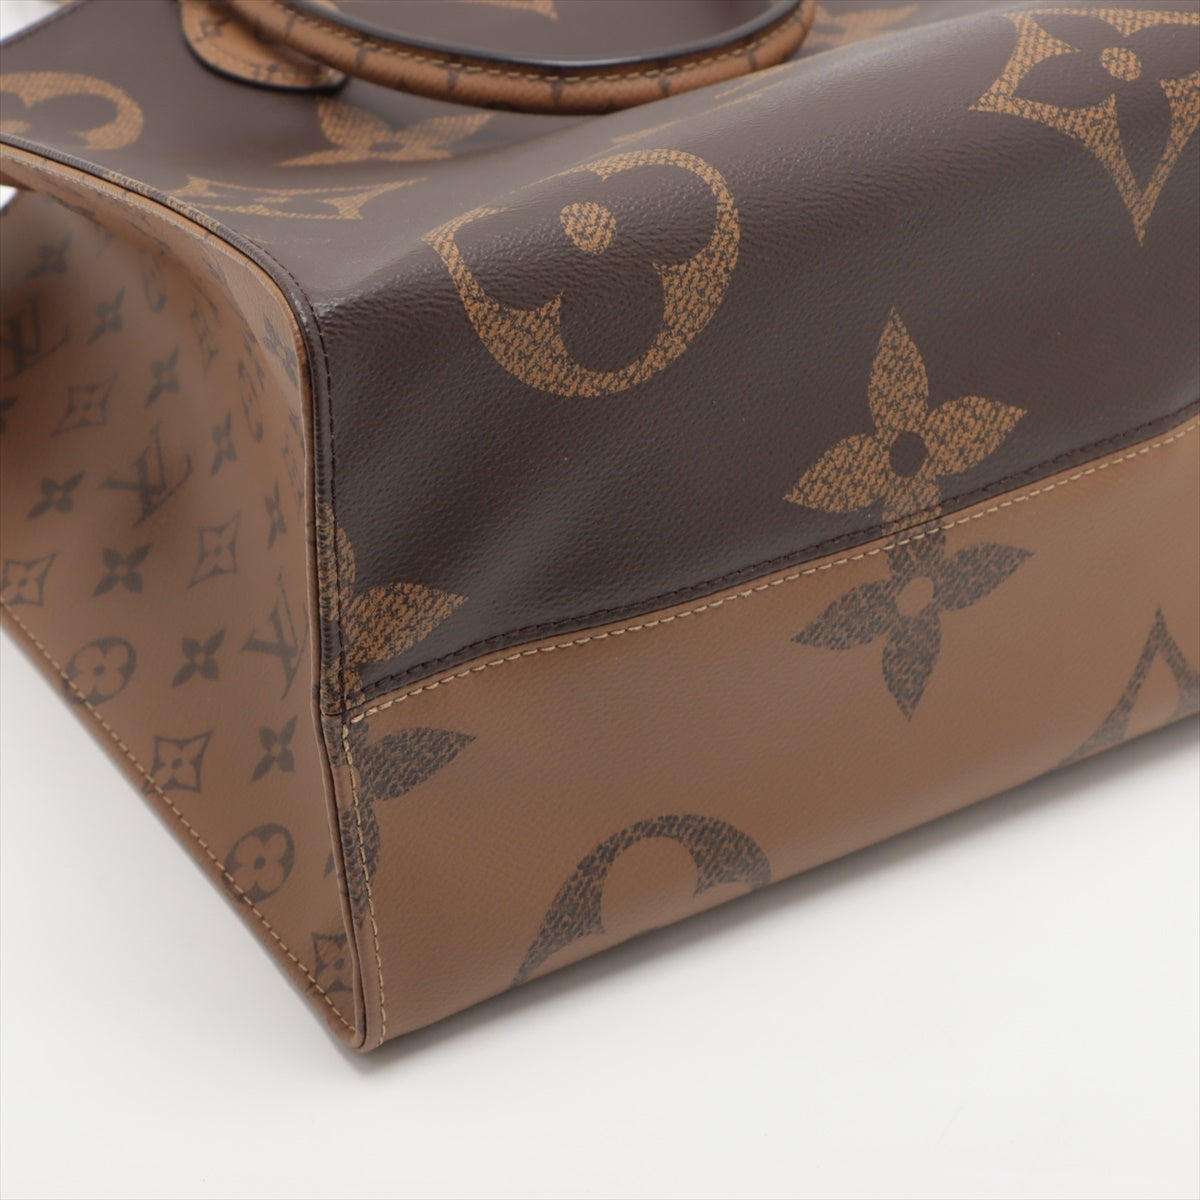 Louis Vuitton Giant Monogram Reverse On the Go GM M45320 There was an RFID response